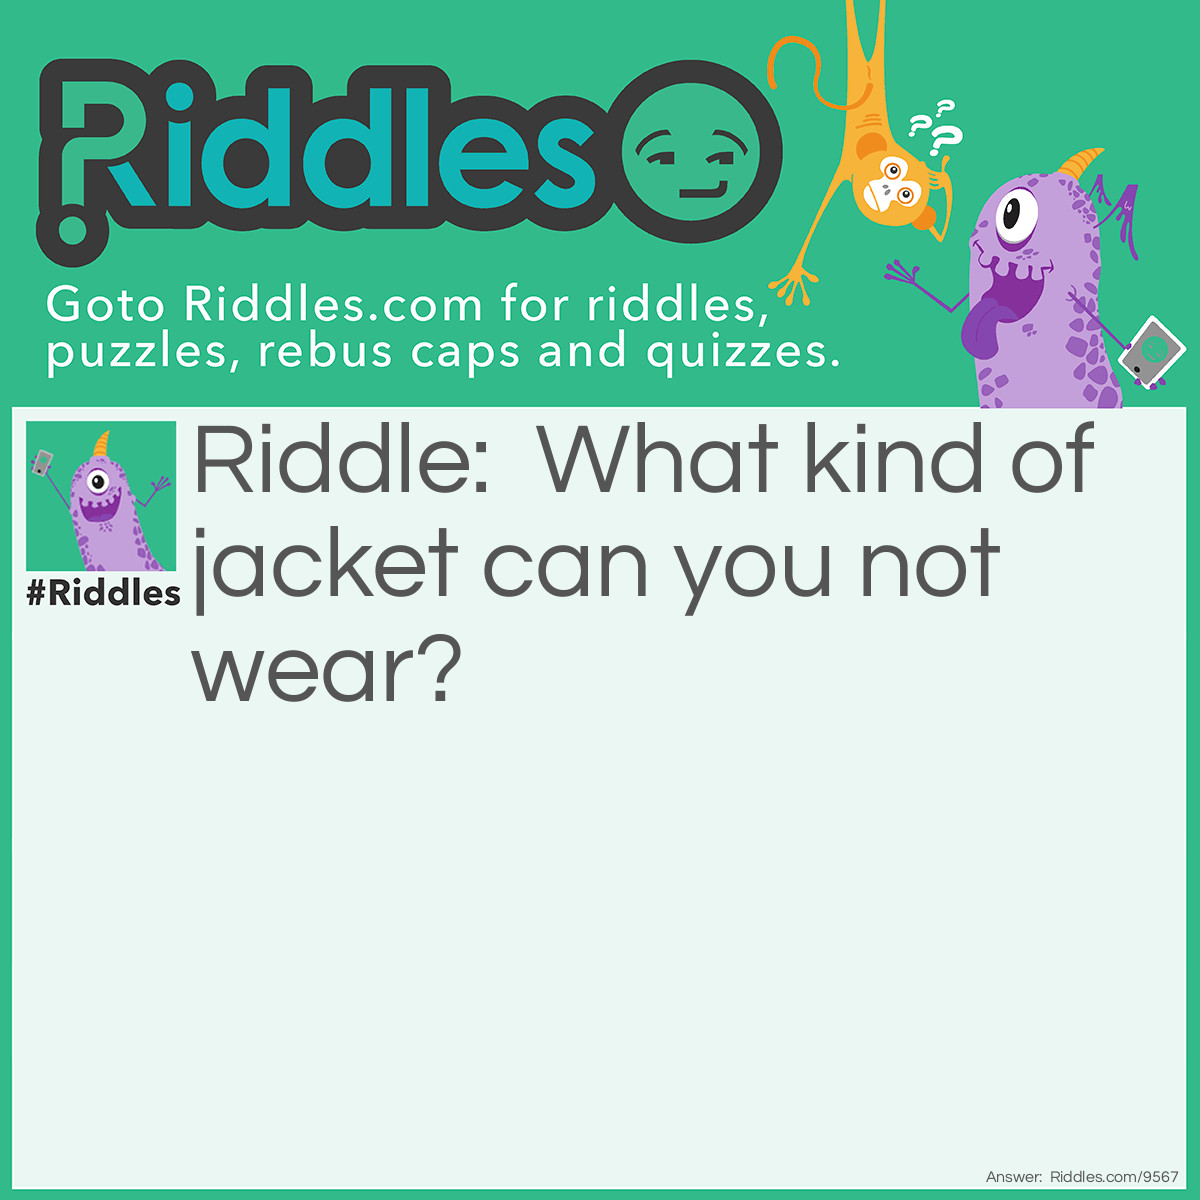 Riddle: What kind of jacket can you not wear? Answer: A Full Metal Jacket.